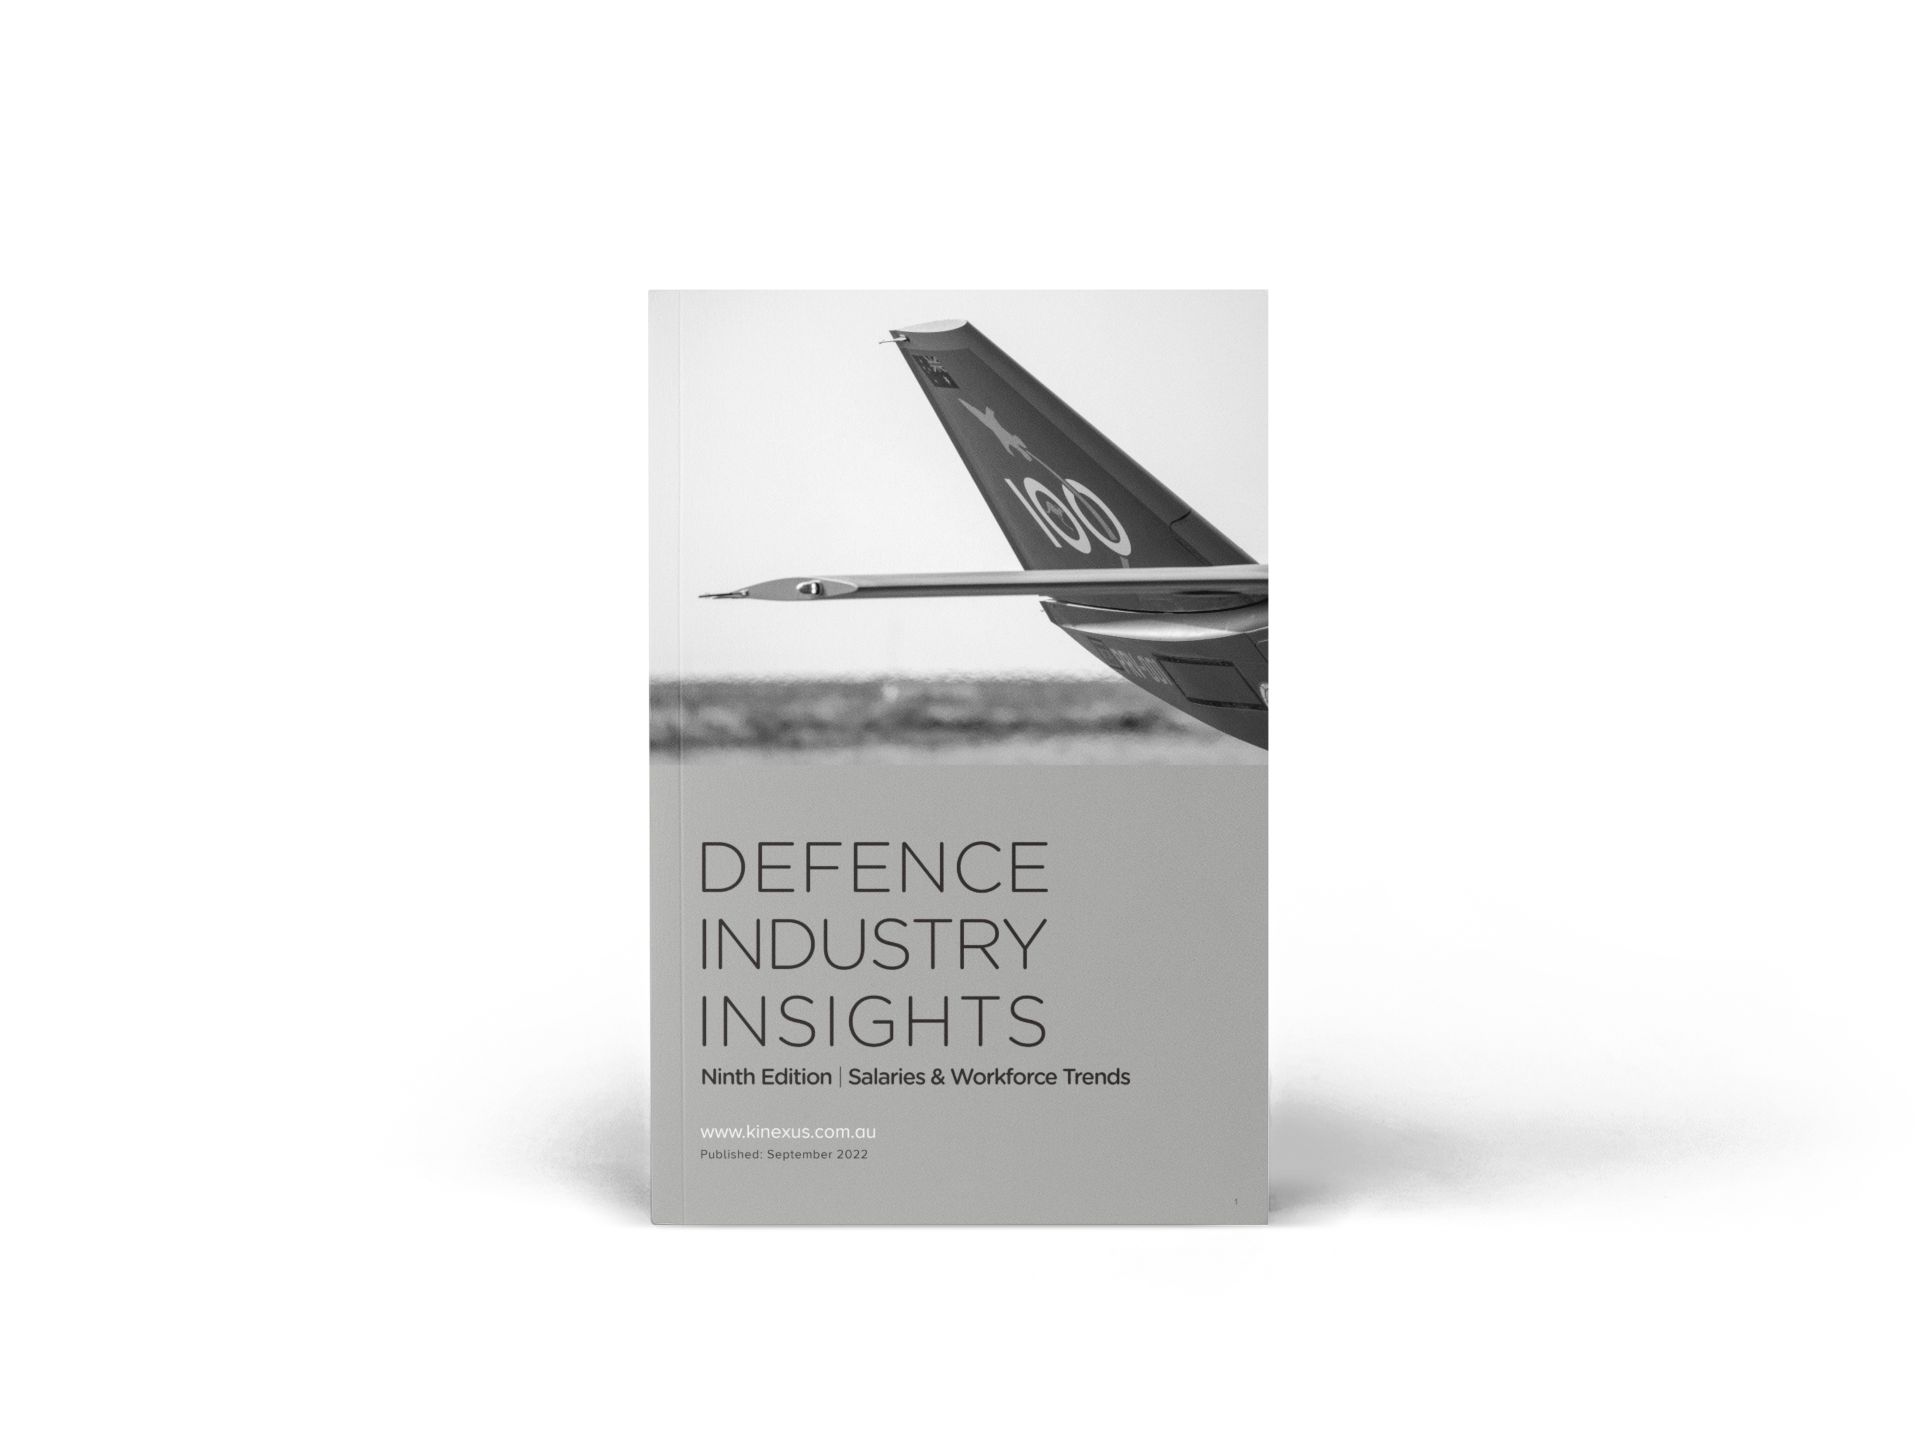 Defence Industry Insights - 9th Edition